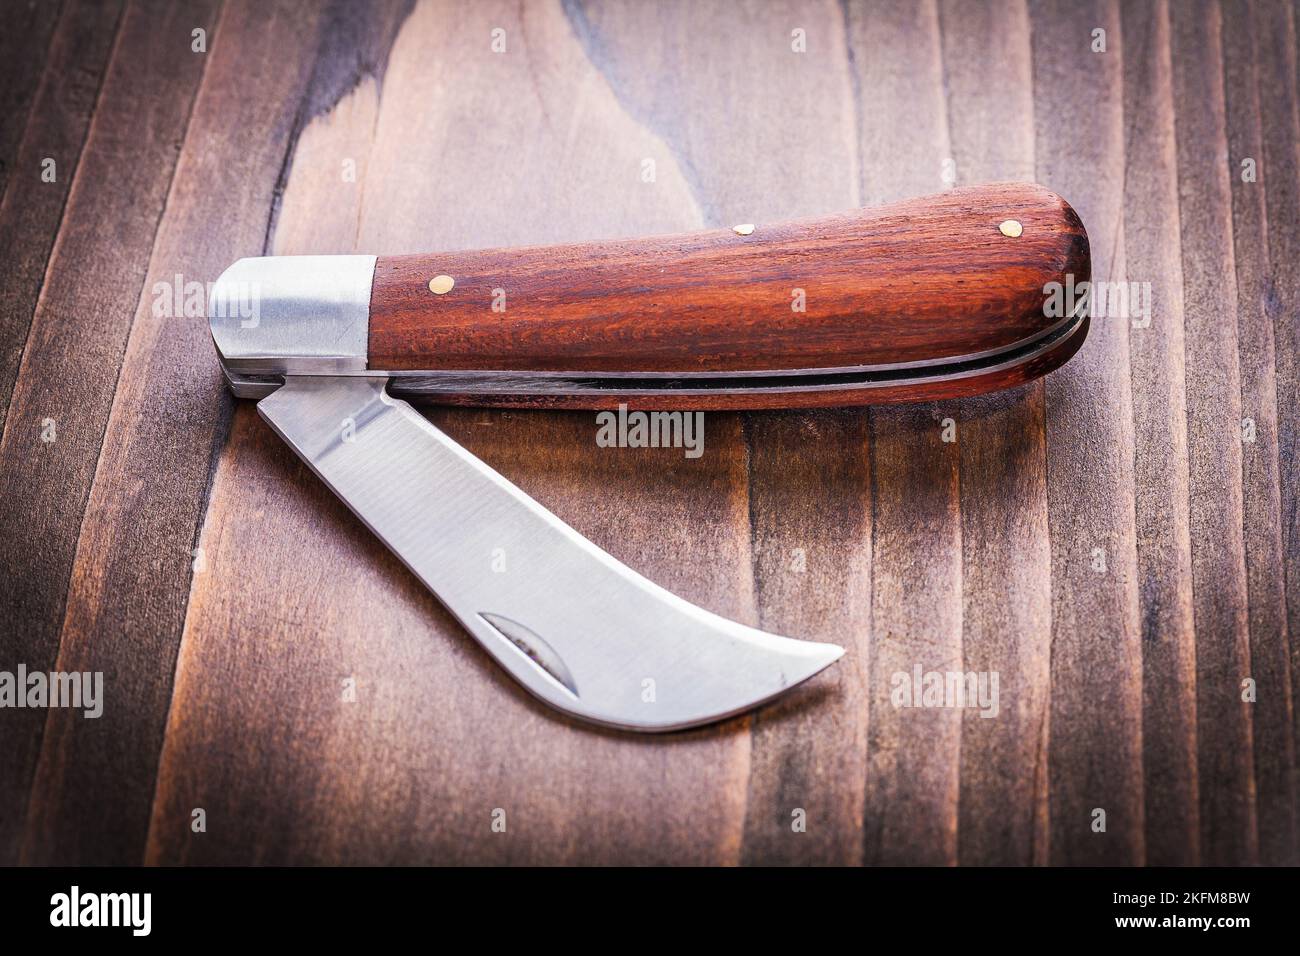 opened agricultural knife on vintage wooden board close up Stock Photo